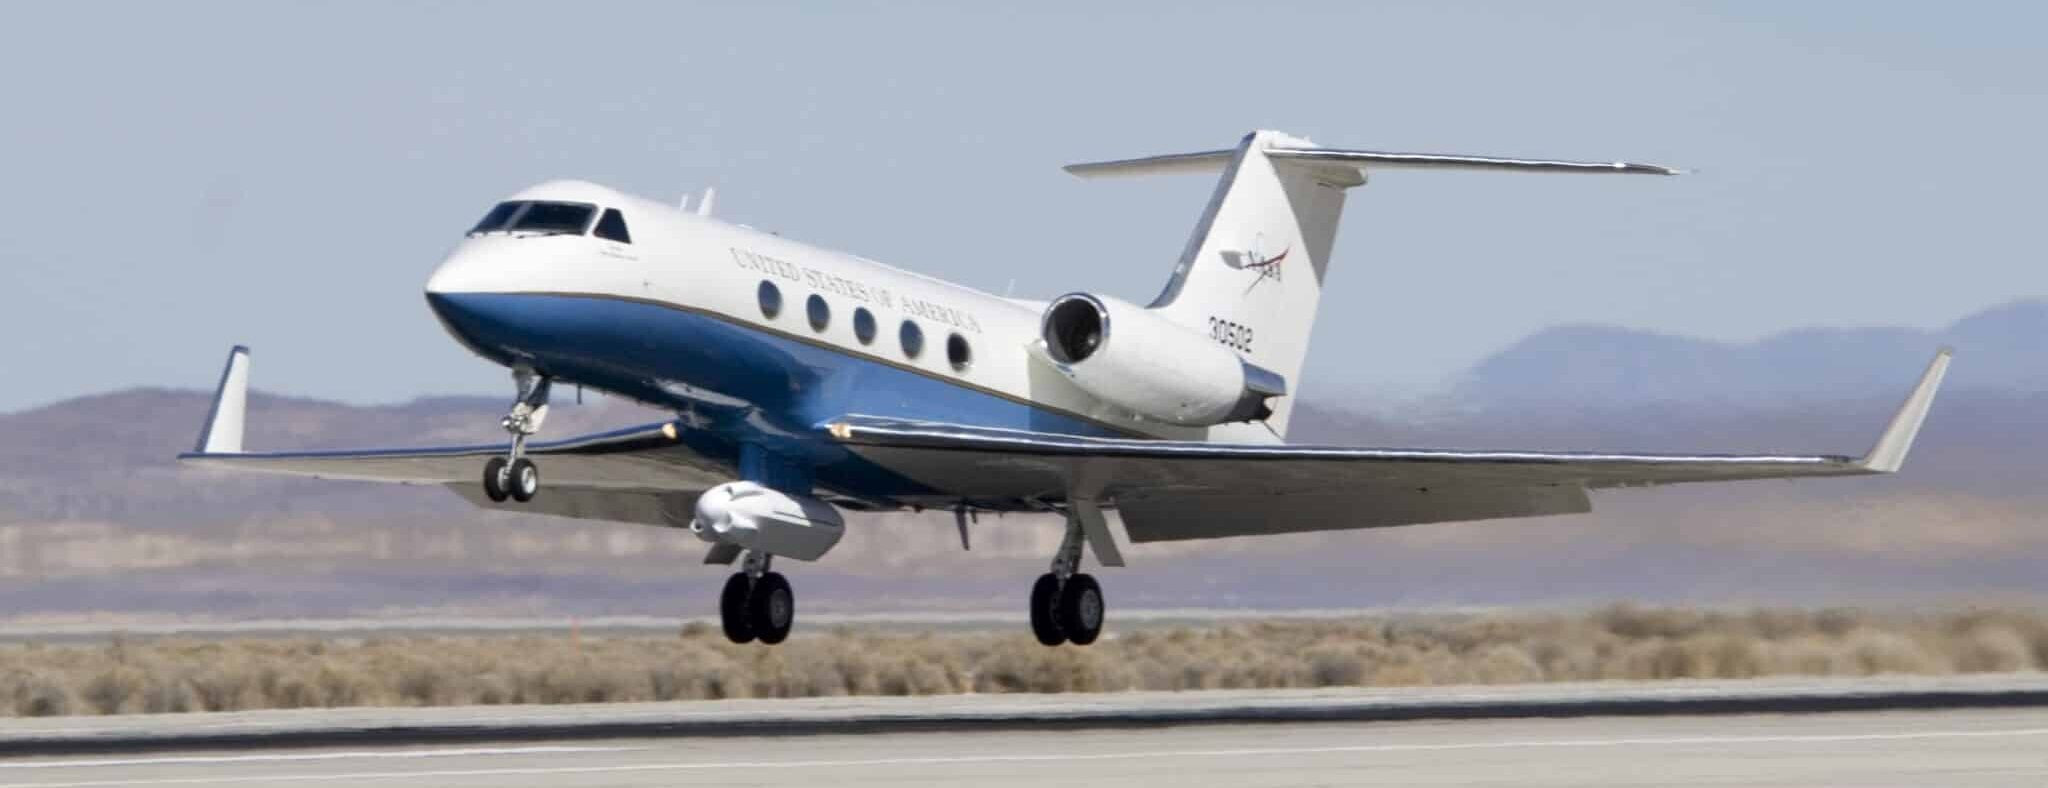 Modified NASA Gulfstream III in early flight tests with the UAVSAR pod attached to the underside of the aircraft (image credit: NASA/DFRC)